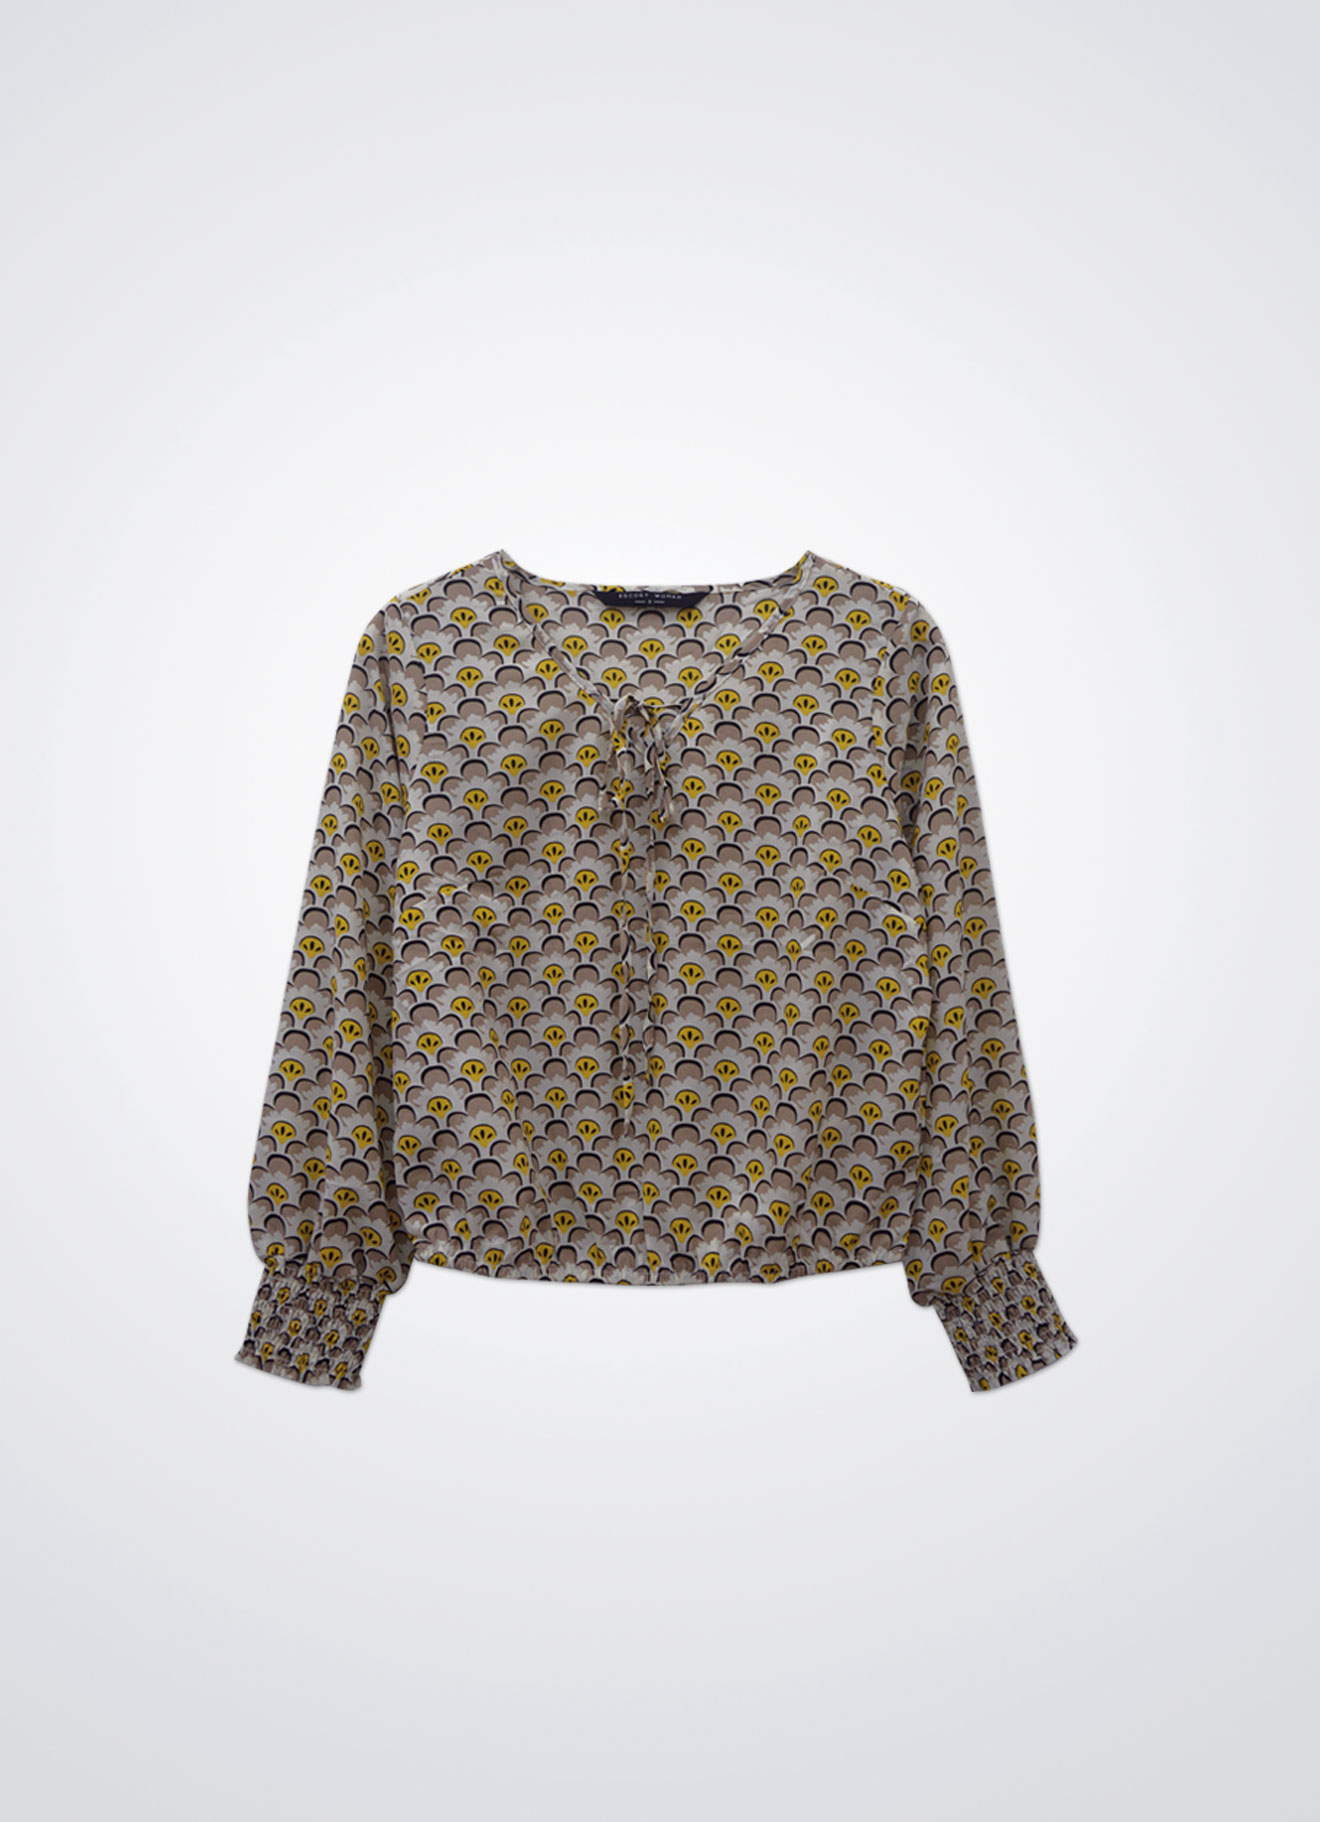 Nougat by Long Sleeve Top